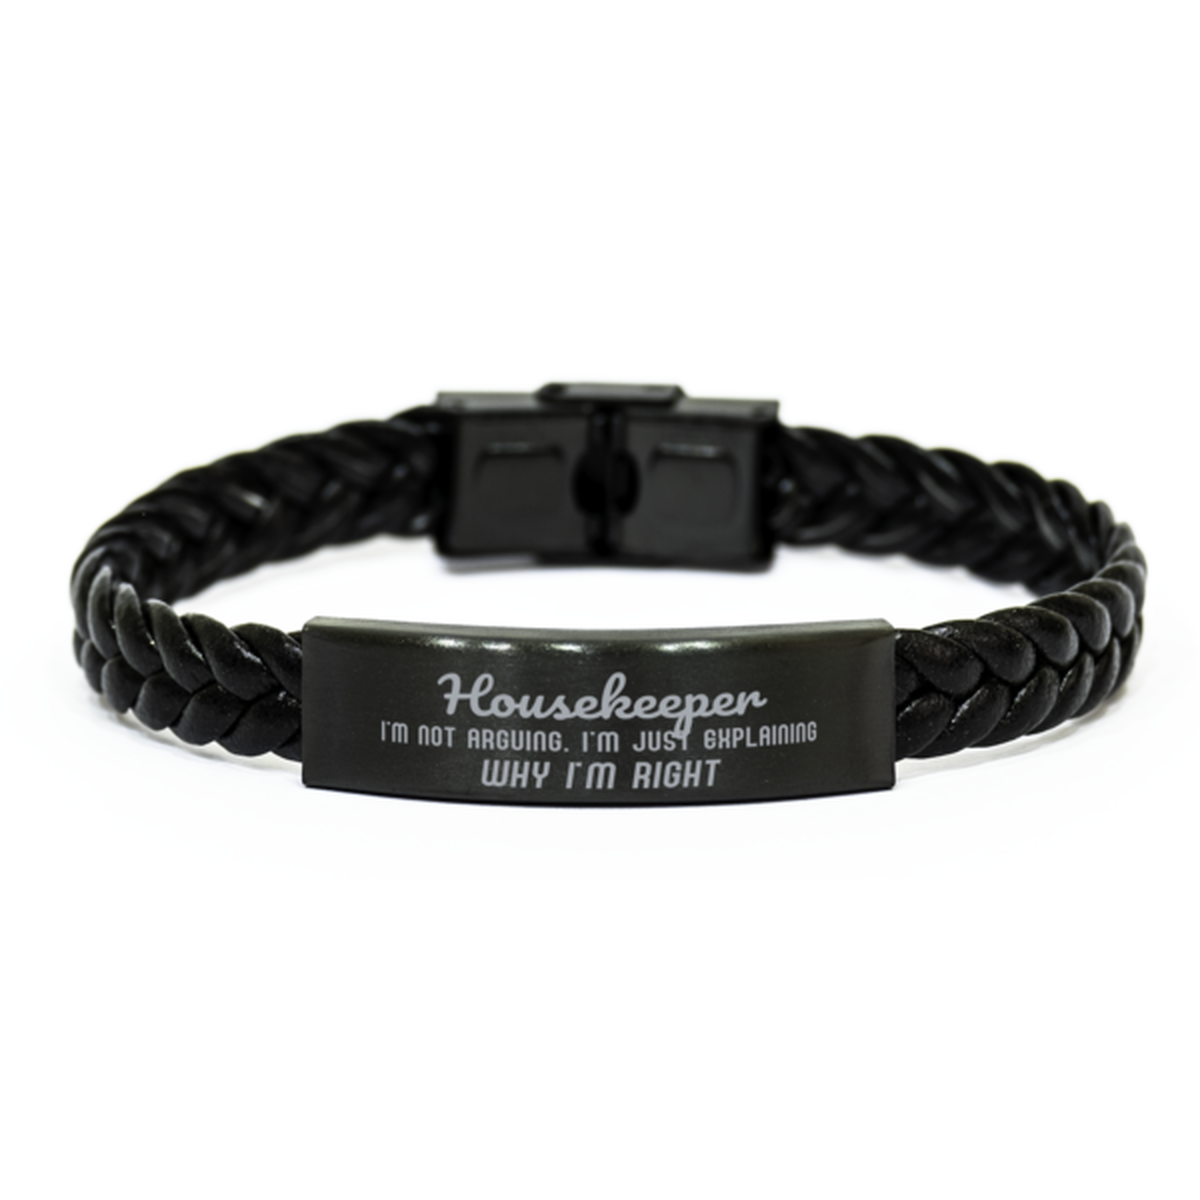 Housekeeper I'm not Arguing. I'm Just Explaining Why I'm RIGHT Braided Leather Bracelet, Graduation Birthday Christmas Housekeeper Gifts For Housekeeper Funny Saying Quote Present for Men Women Coworker